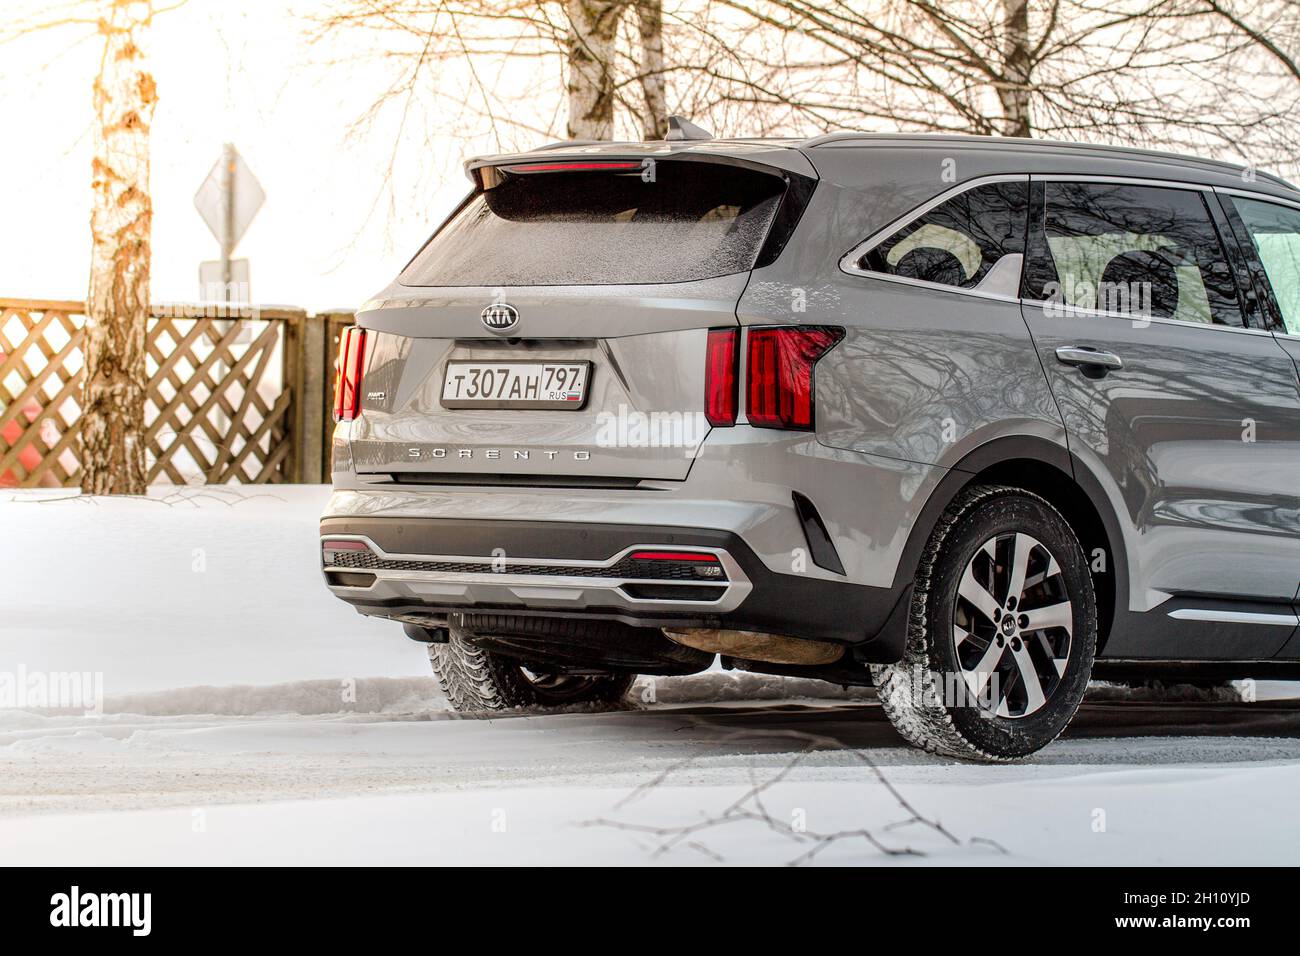 https://c8.alamy.com/comp/2H10YJD/moscow-russia-february-7-2021-kia-sorento-fourth-generation-mq4-compact-crossover-suv-model-year-2020-exterior-back-view-close-up-view-on-nature-2H10YJD.jpg